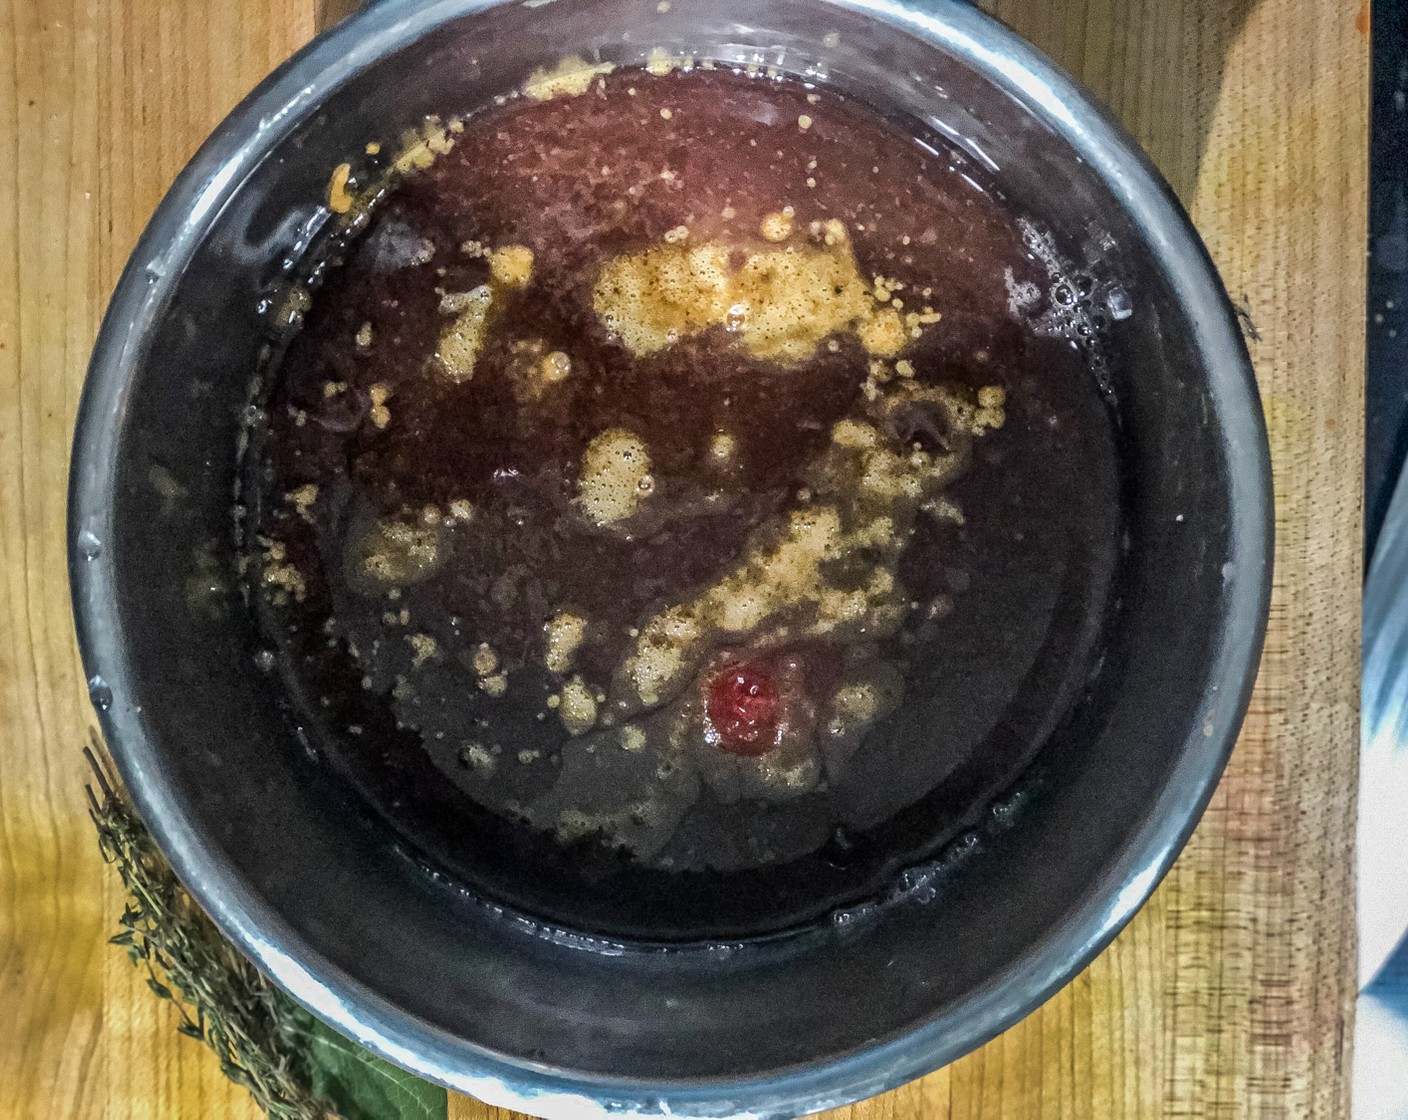 step 7 In the instant-pot add Red Wine (1 cup), Unsalted Beef Stock (4 cups), Tomato Paste (2 Tbsp), Worcestershire Sauce (2 Tbsp), Fresh Thyme (5 sprigs), and Bay Leaves (3). Stir in the roux until no lumps remain.